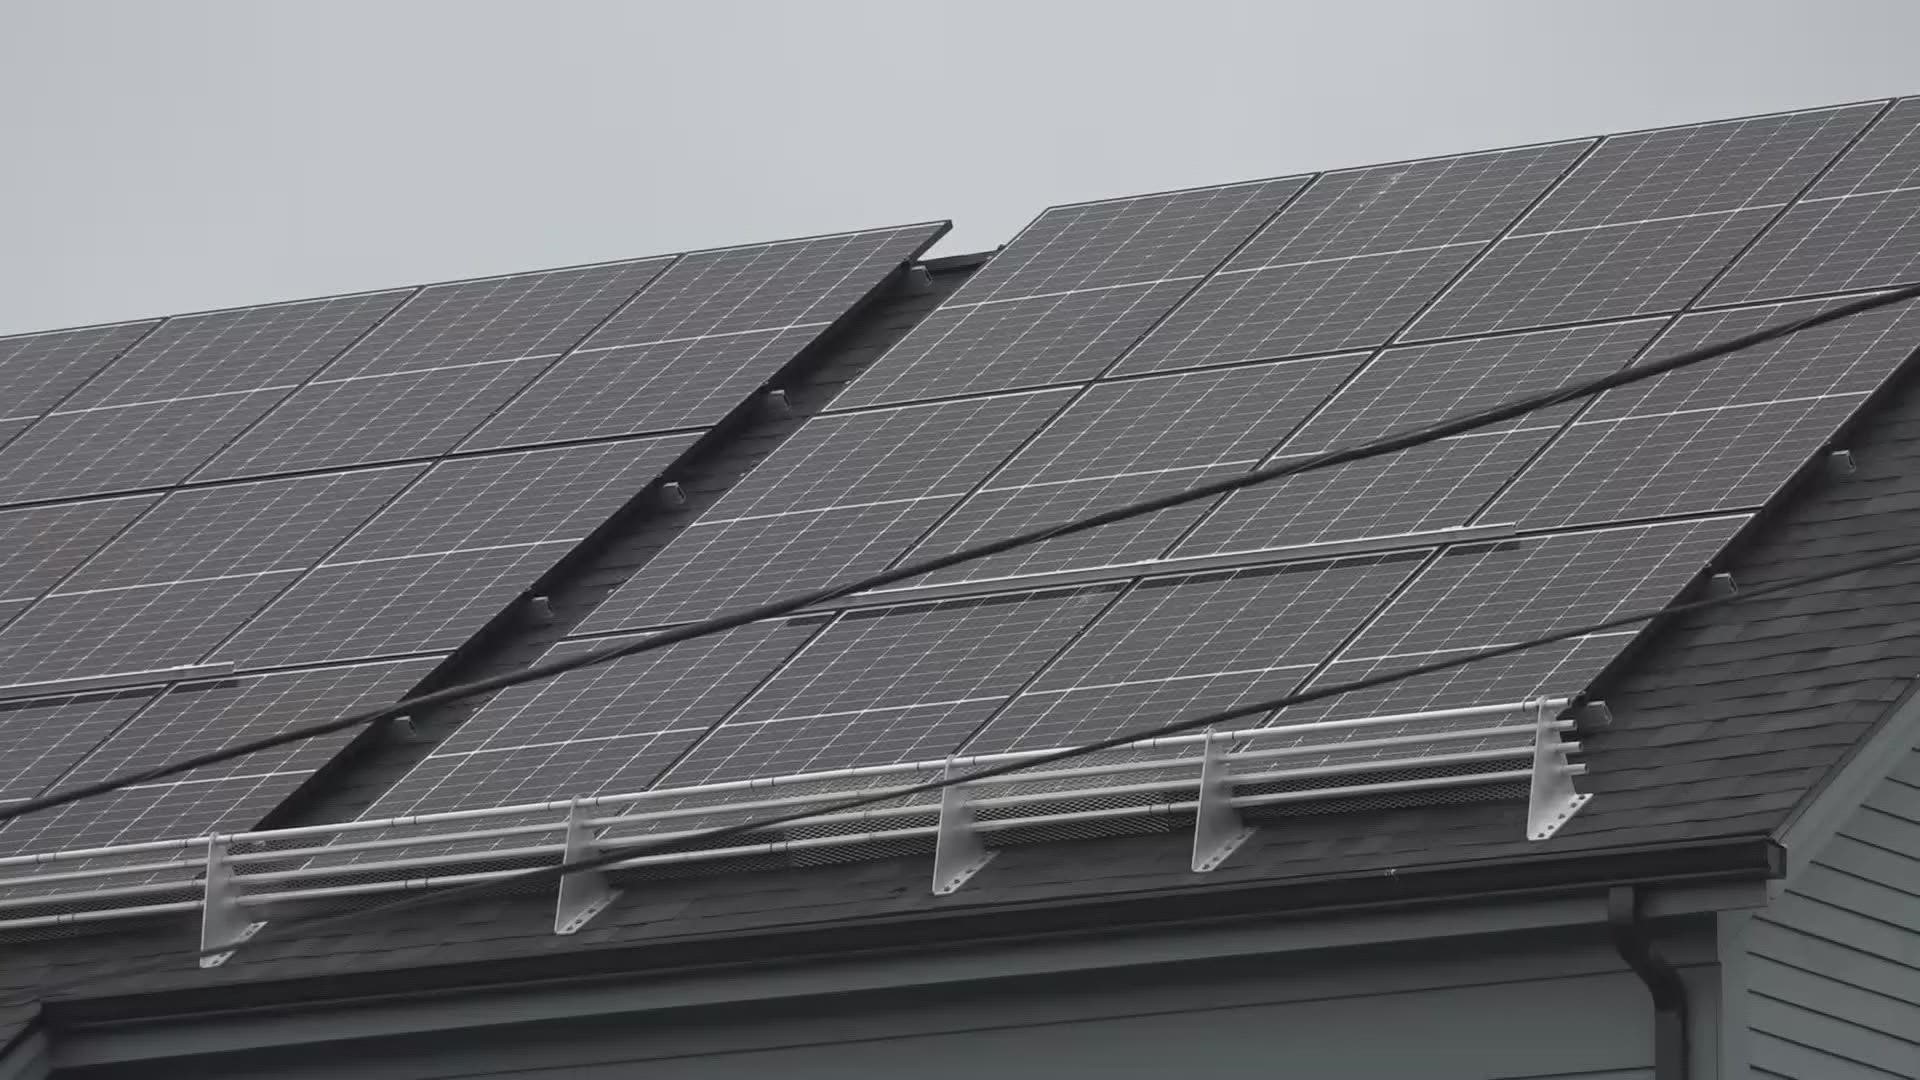 The city of Portland wants to partner with an energy service company to make renewable energy options more affordable to residents for their homes and businesses.